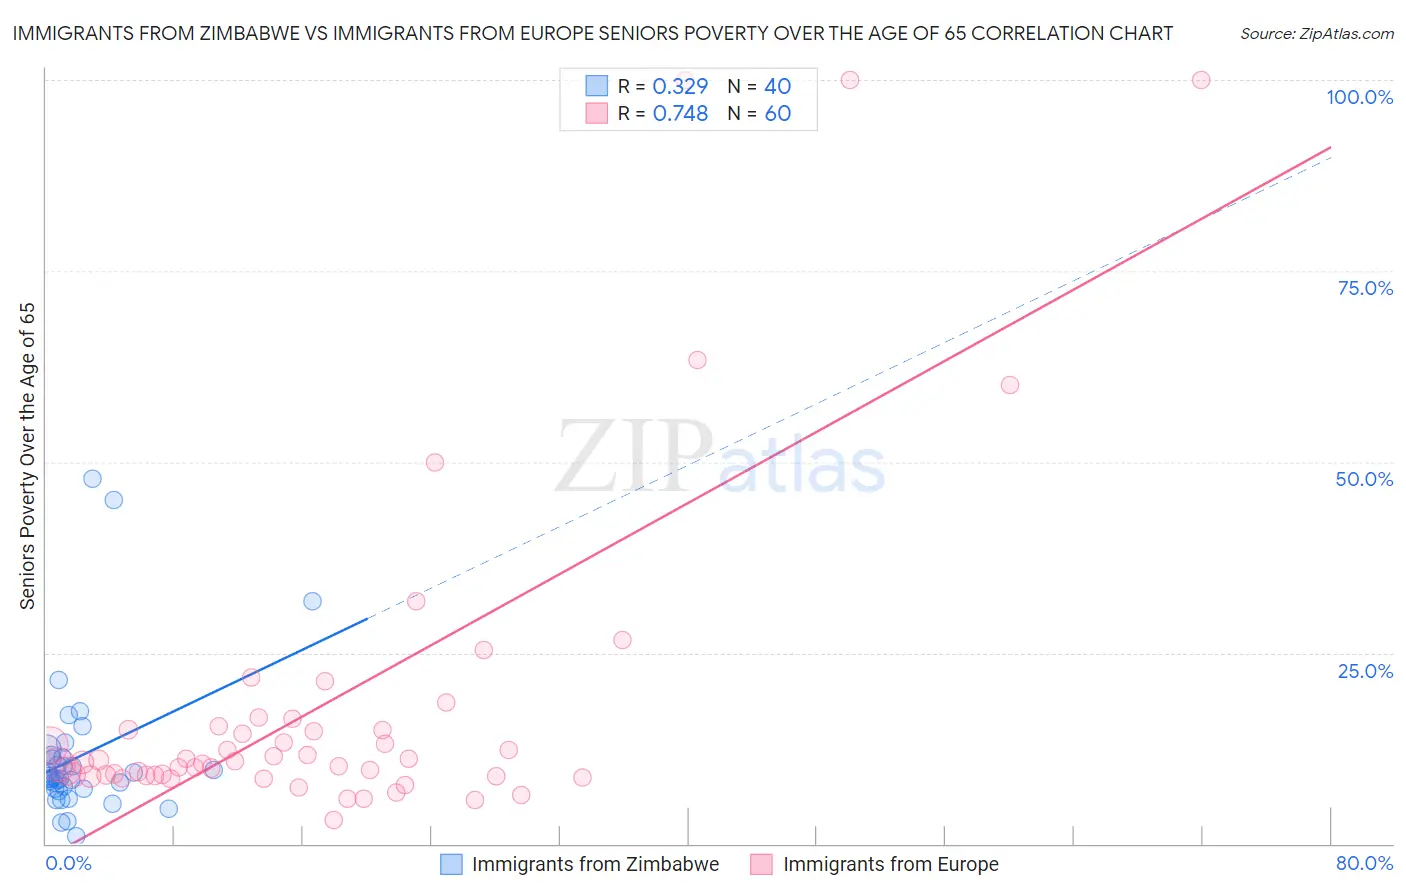 Immigrants from Zimbabwe vs Immigrants from Europe Seniors Poverty Over the Age of 65